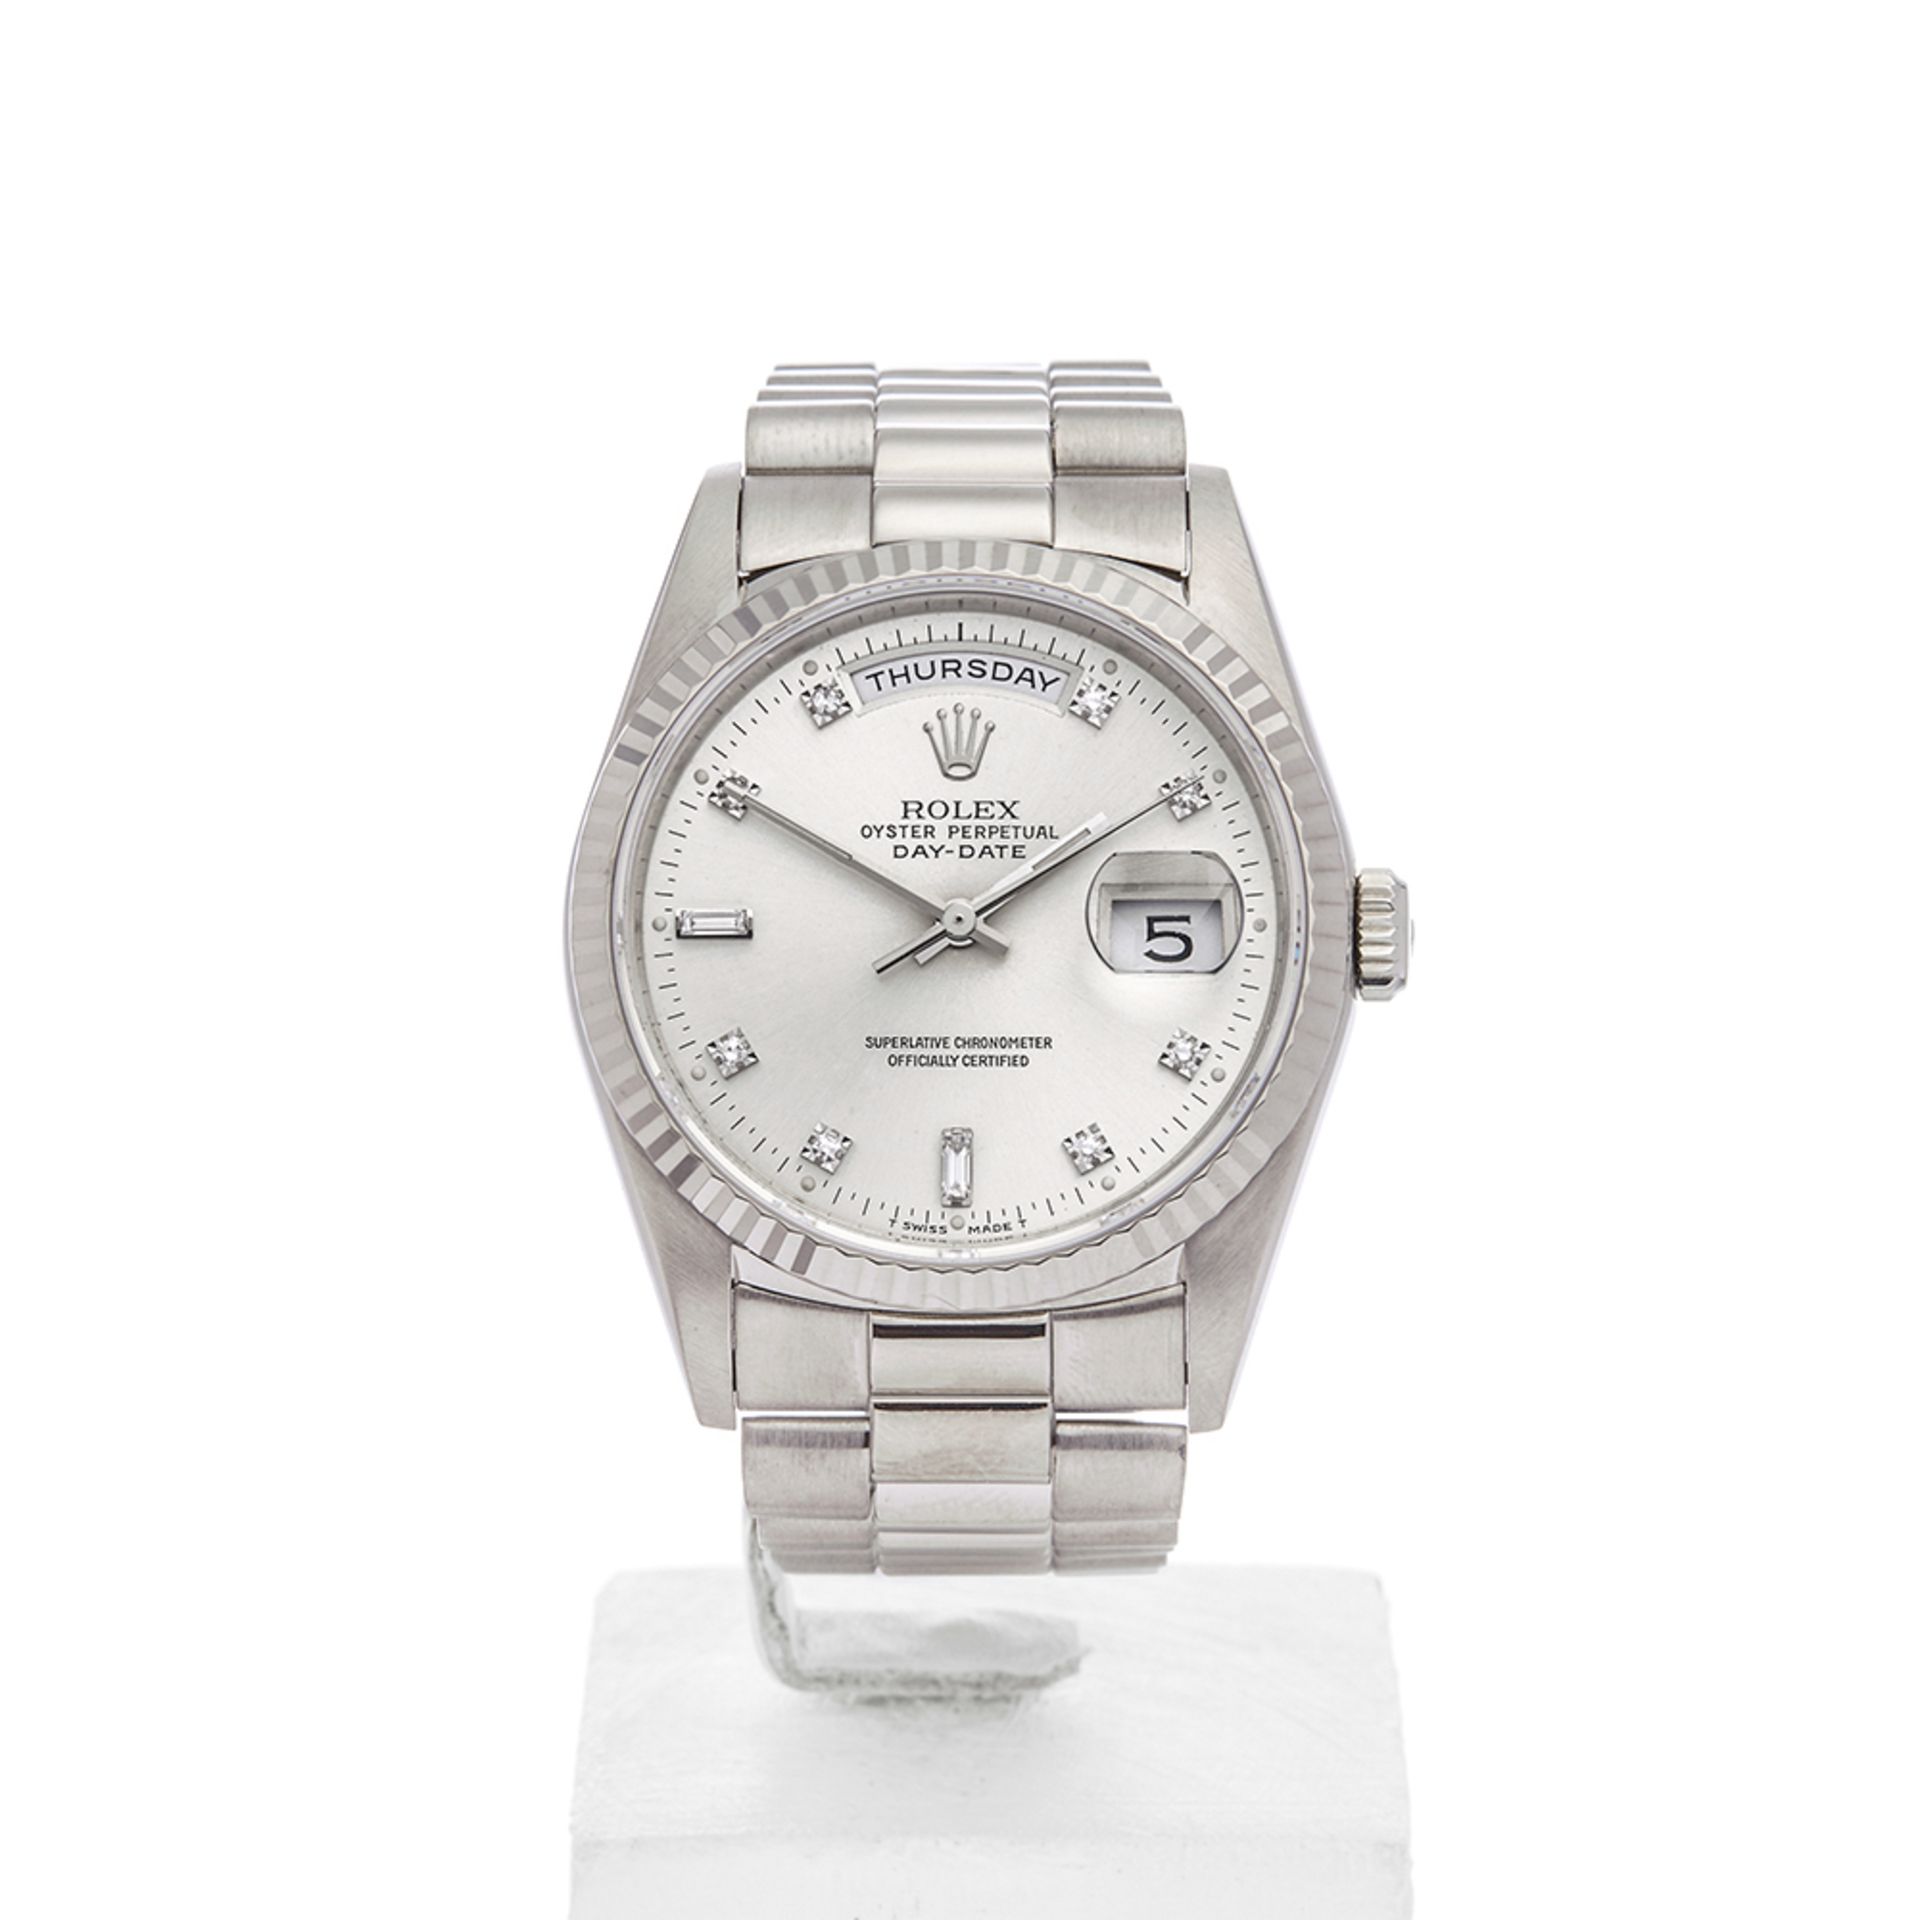 Day-Date 36mm 18K White Gold - 18239 - Image 2 of 7